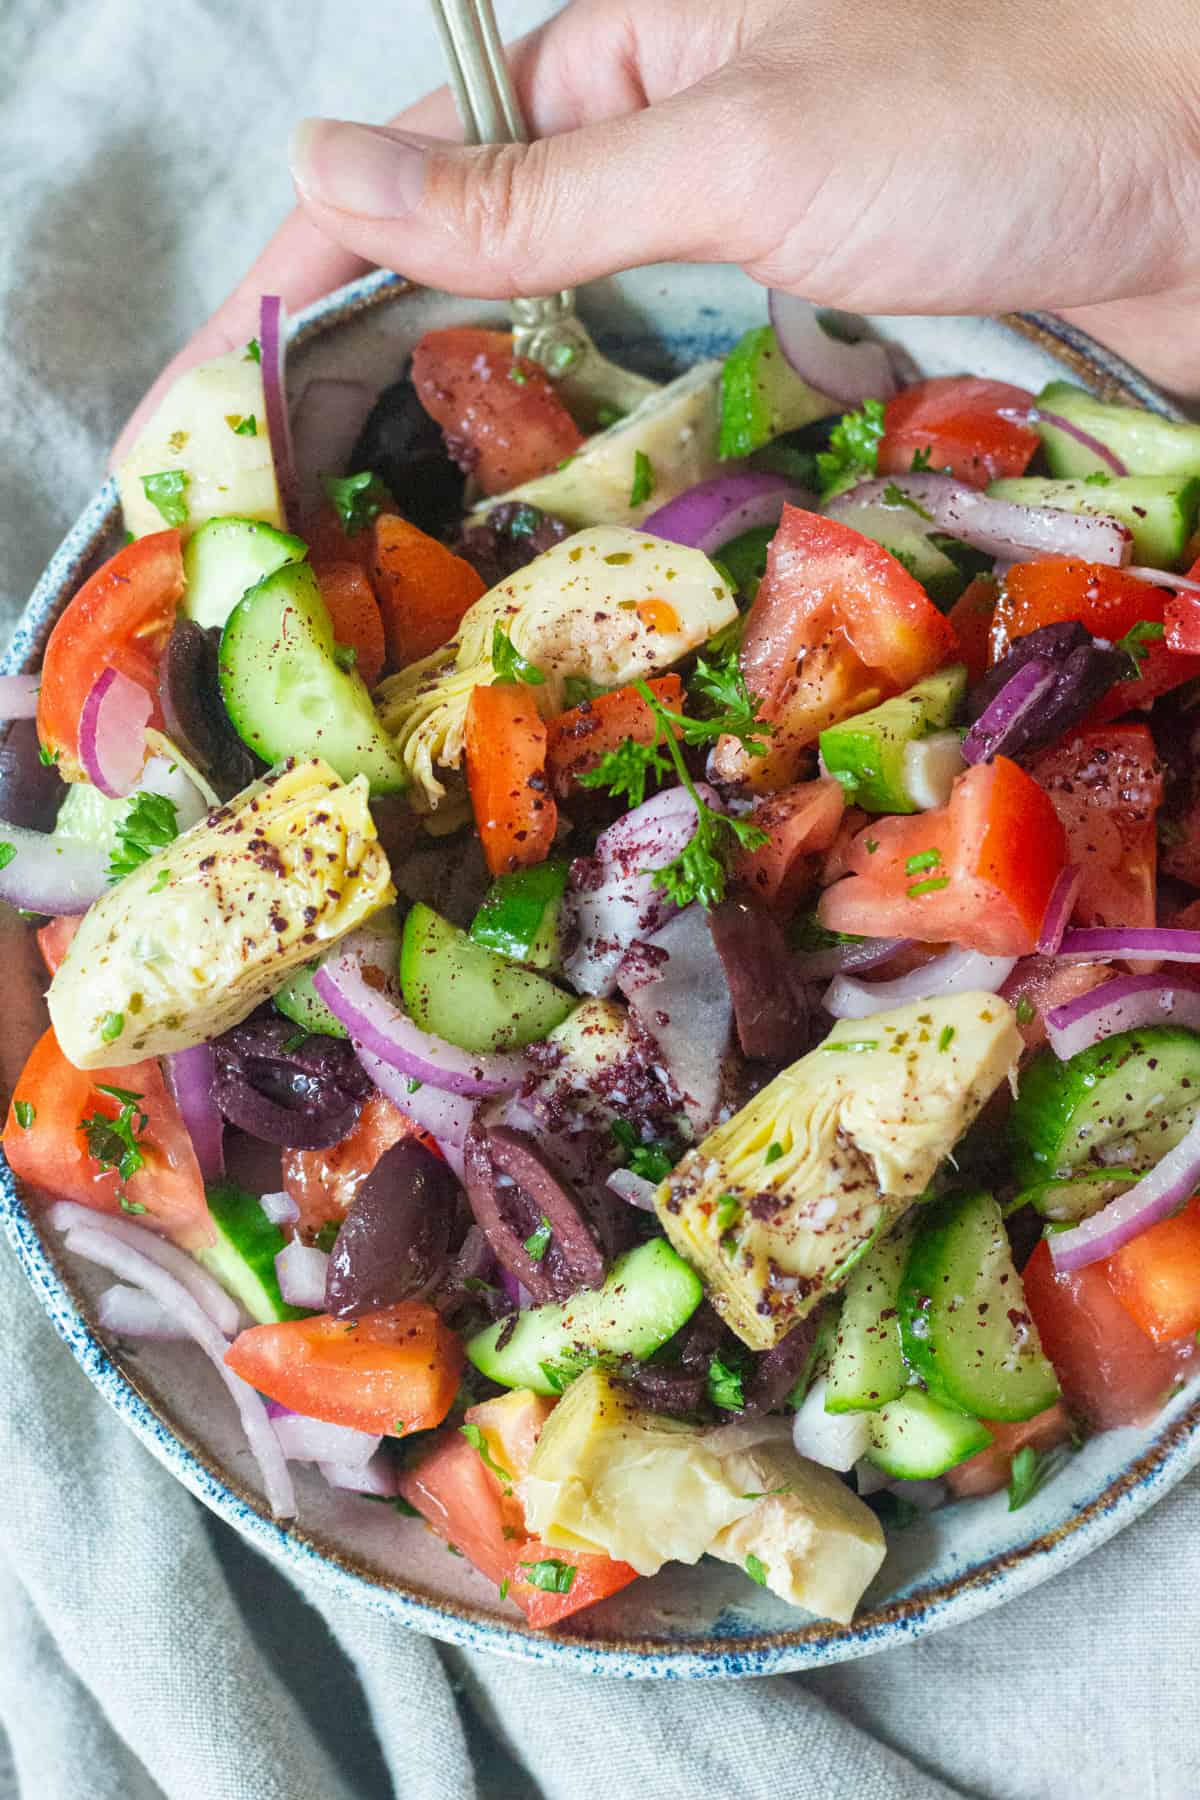 This Mediterranean salad is loaded with fresh vegetables such as cucumbers, tomatoes and herbs. This fresh salad is flavored with a delicious dressing.